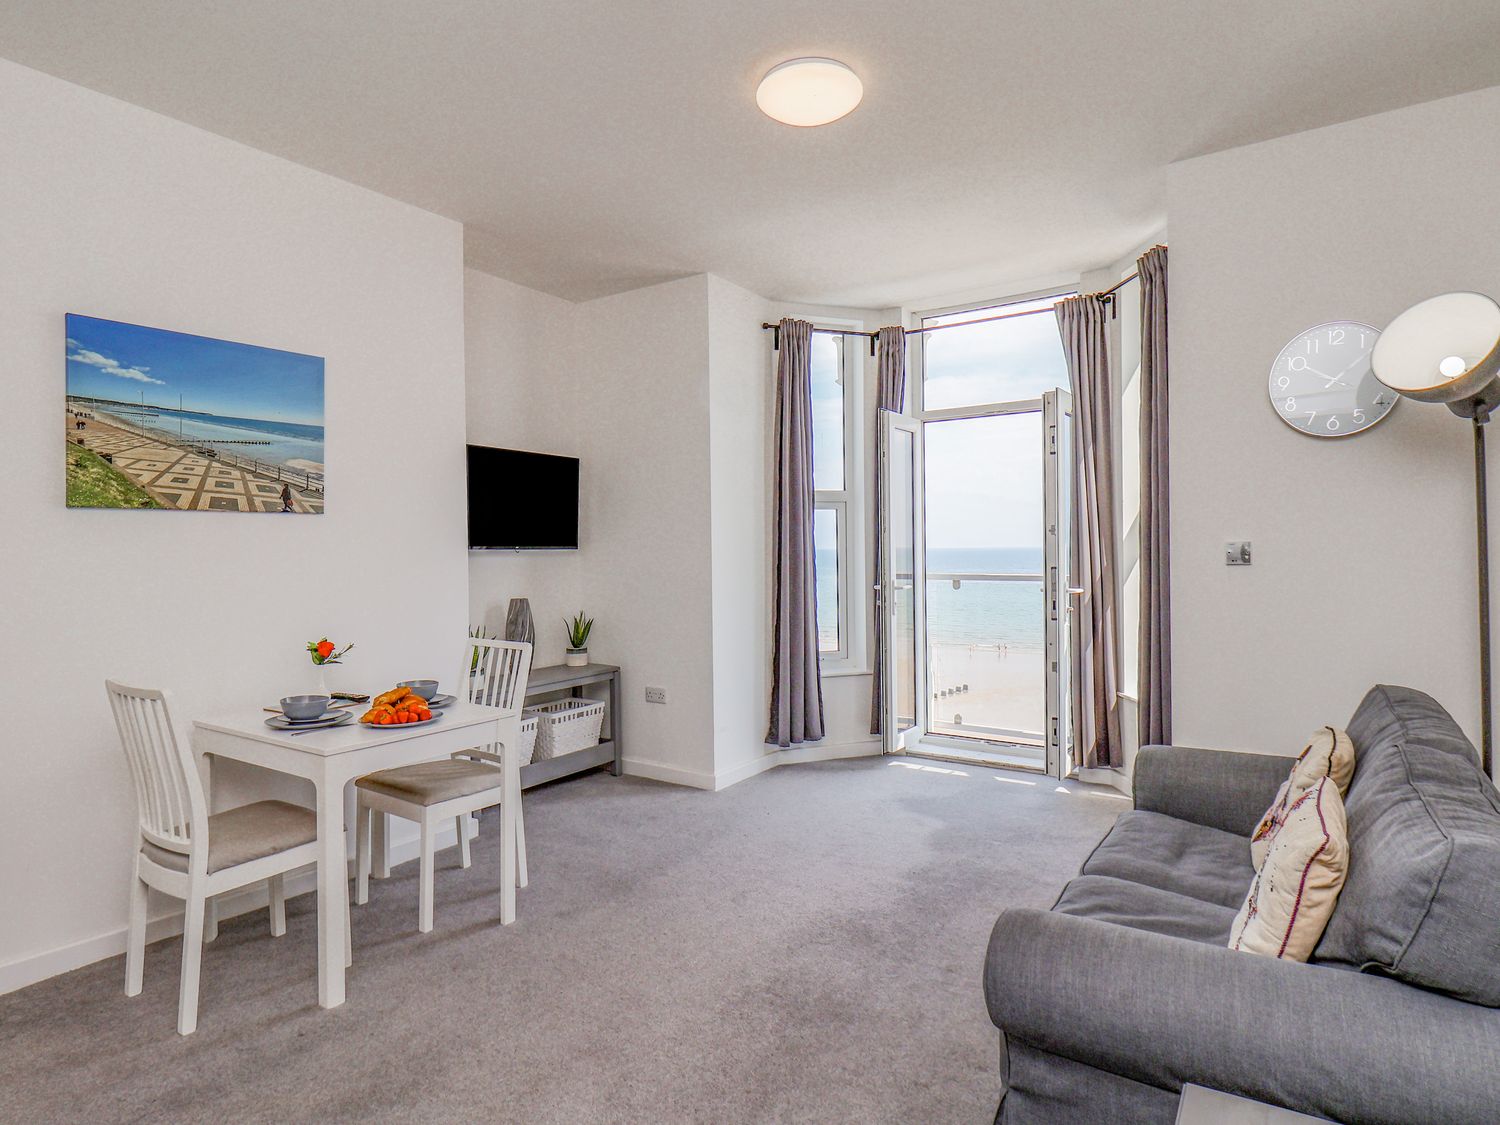 4 Seaview @ Bridlington Bay - North Yorkshire (incl. Whitby) - 1136966 - photo 1